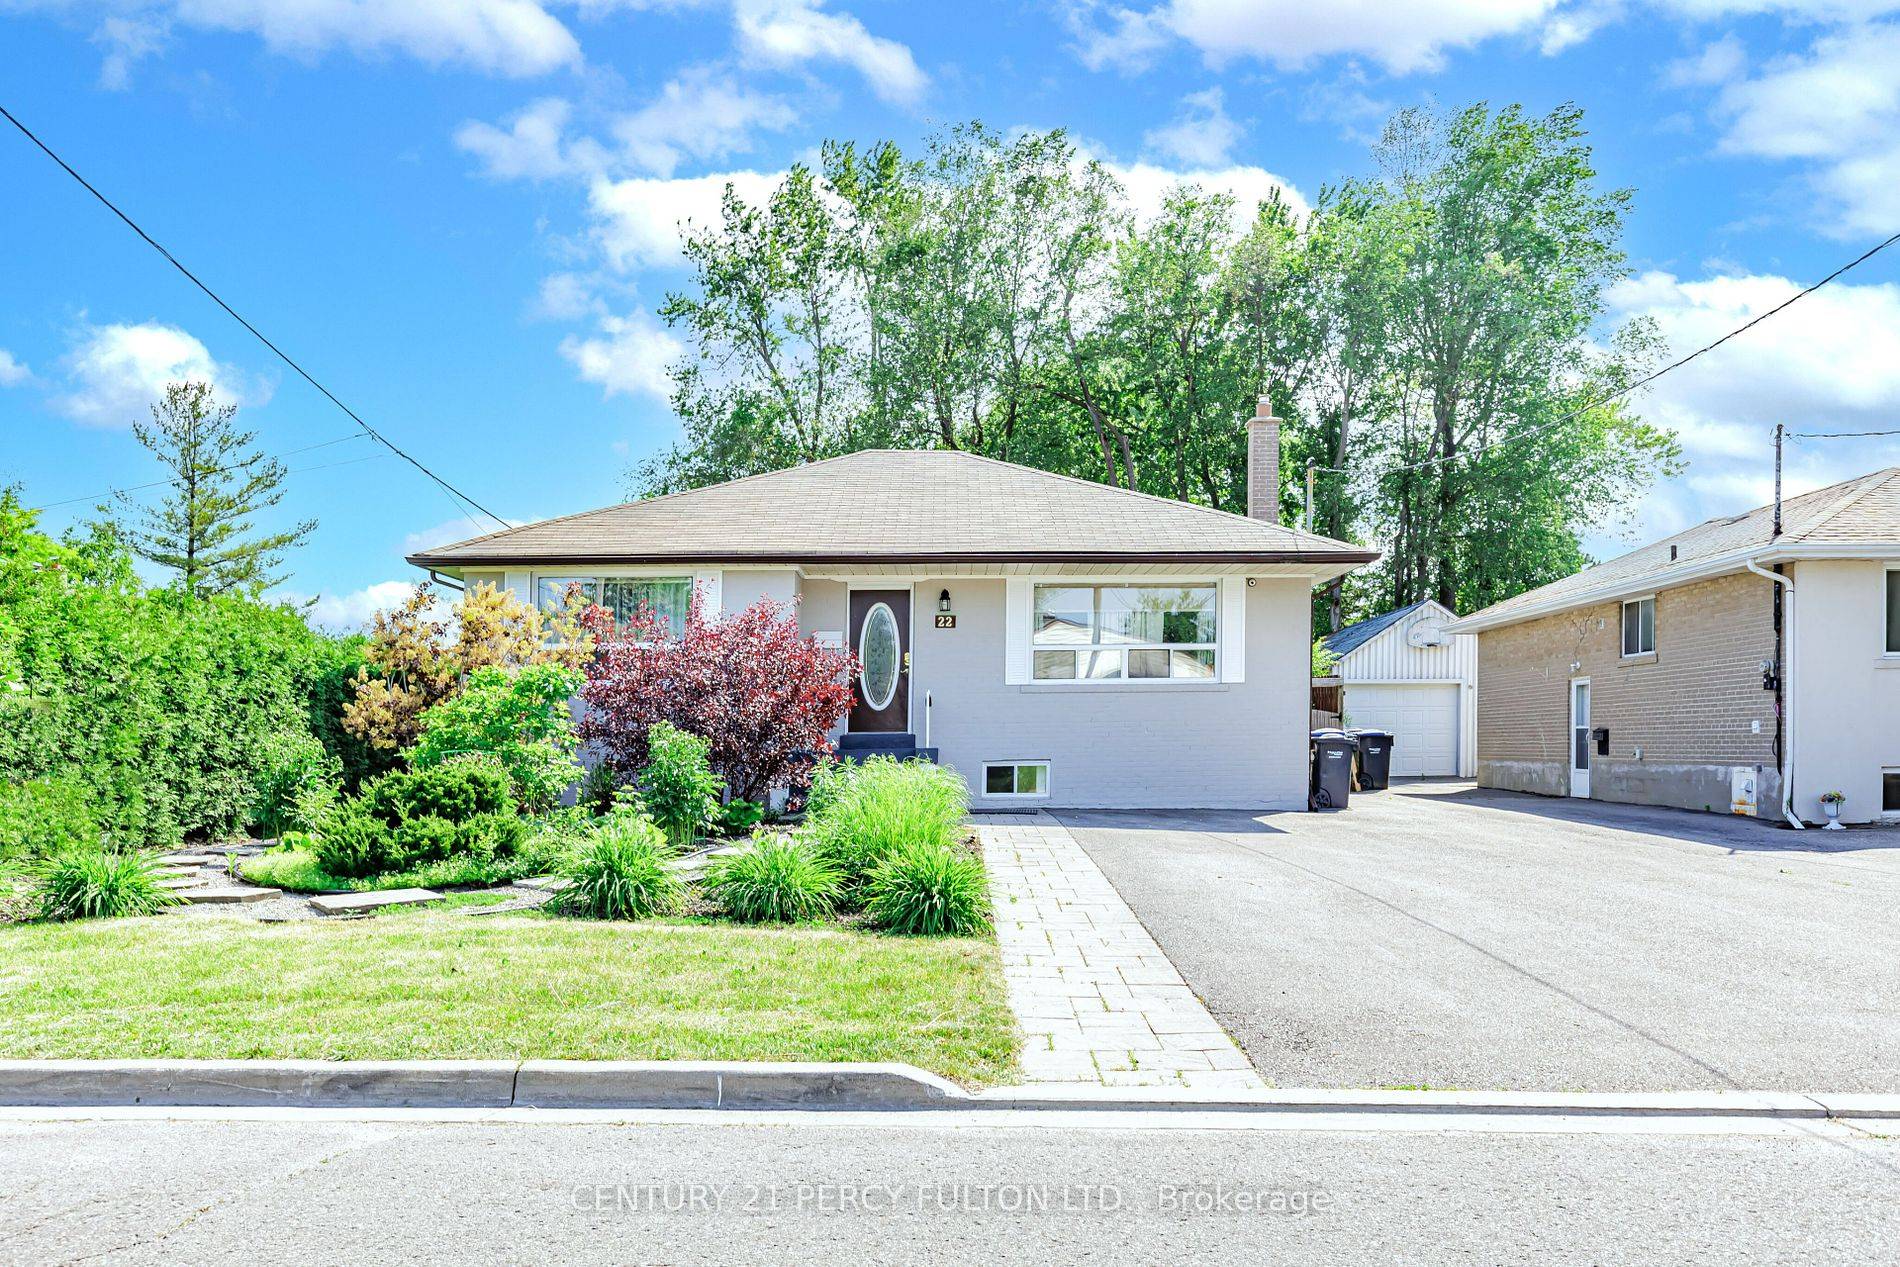 Attention Buyers, Don't Miss This Beautiful Detached Bungalow With A Legal Rentable Basement Of 4 Bedrooms and 2 Full Washrooms With Rent Potential of 3500 Approx.